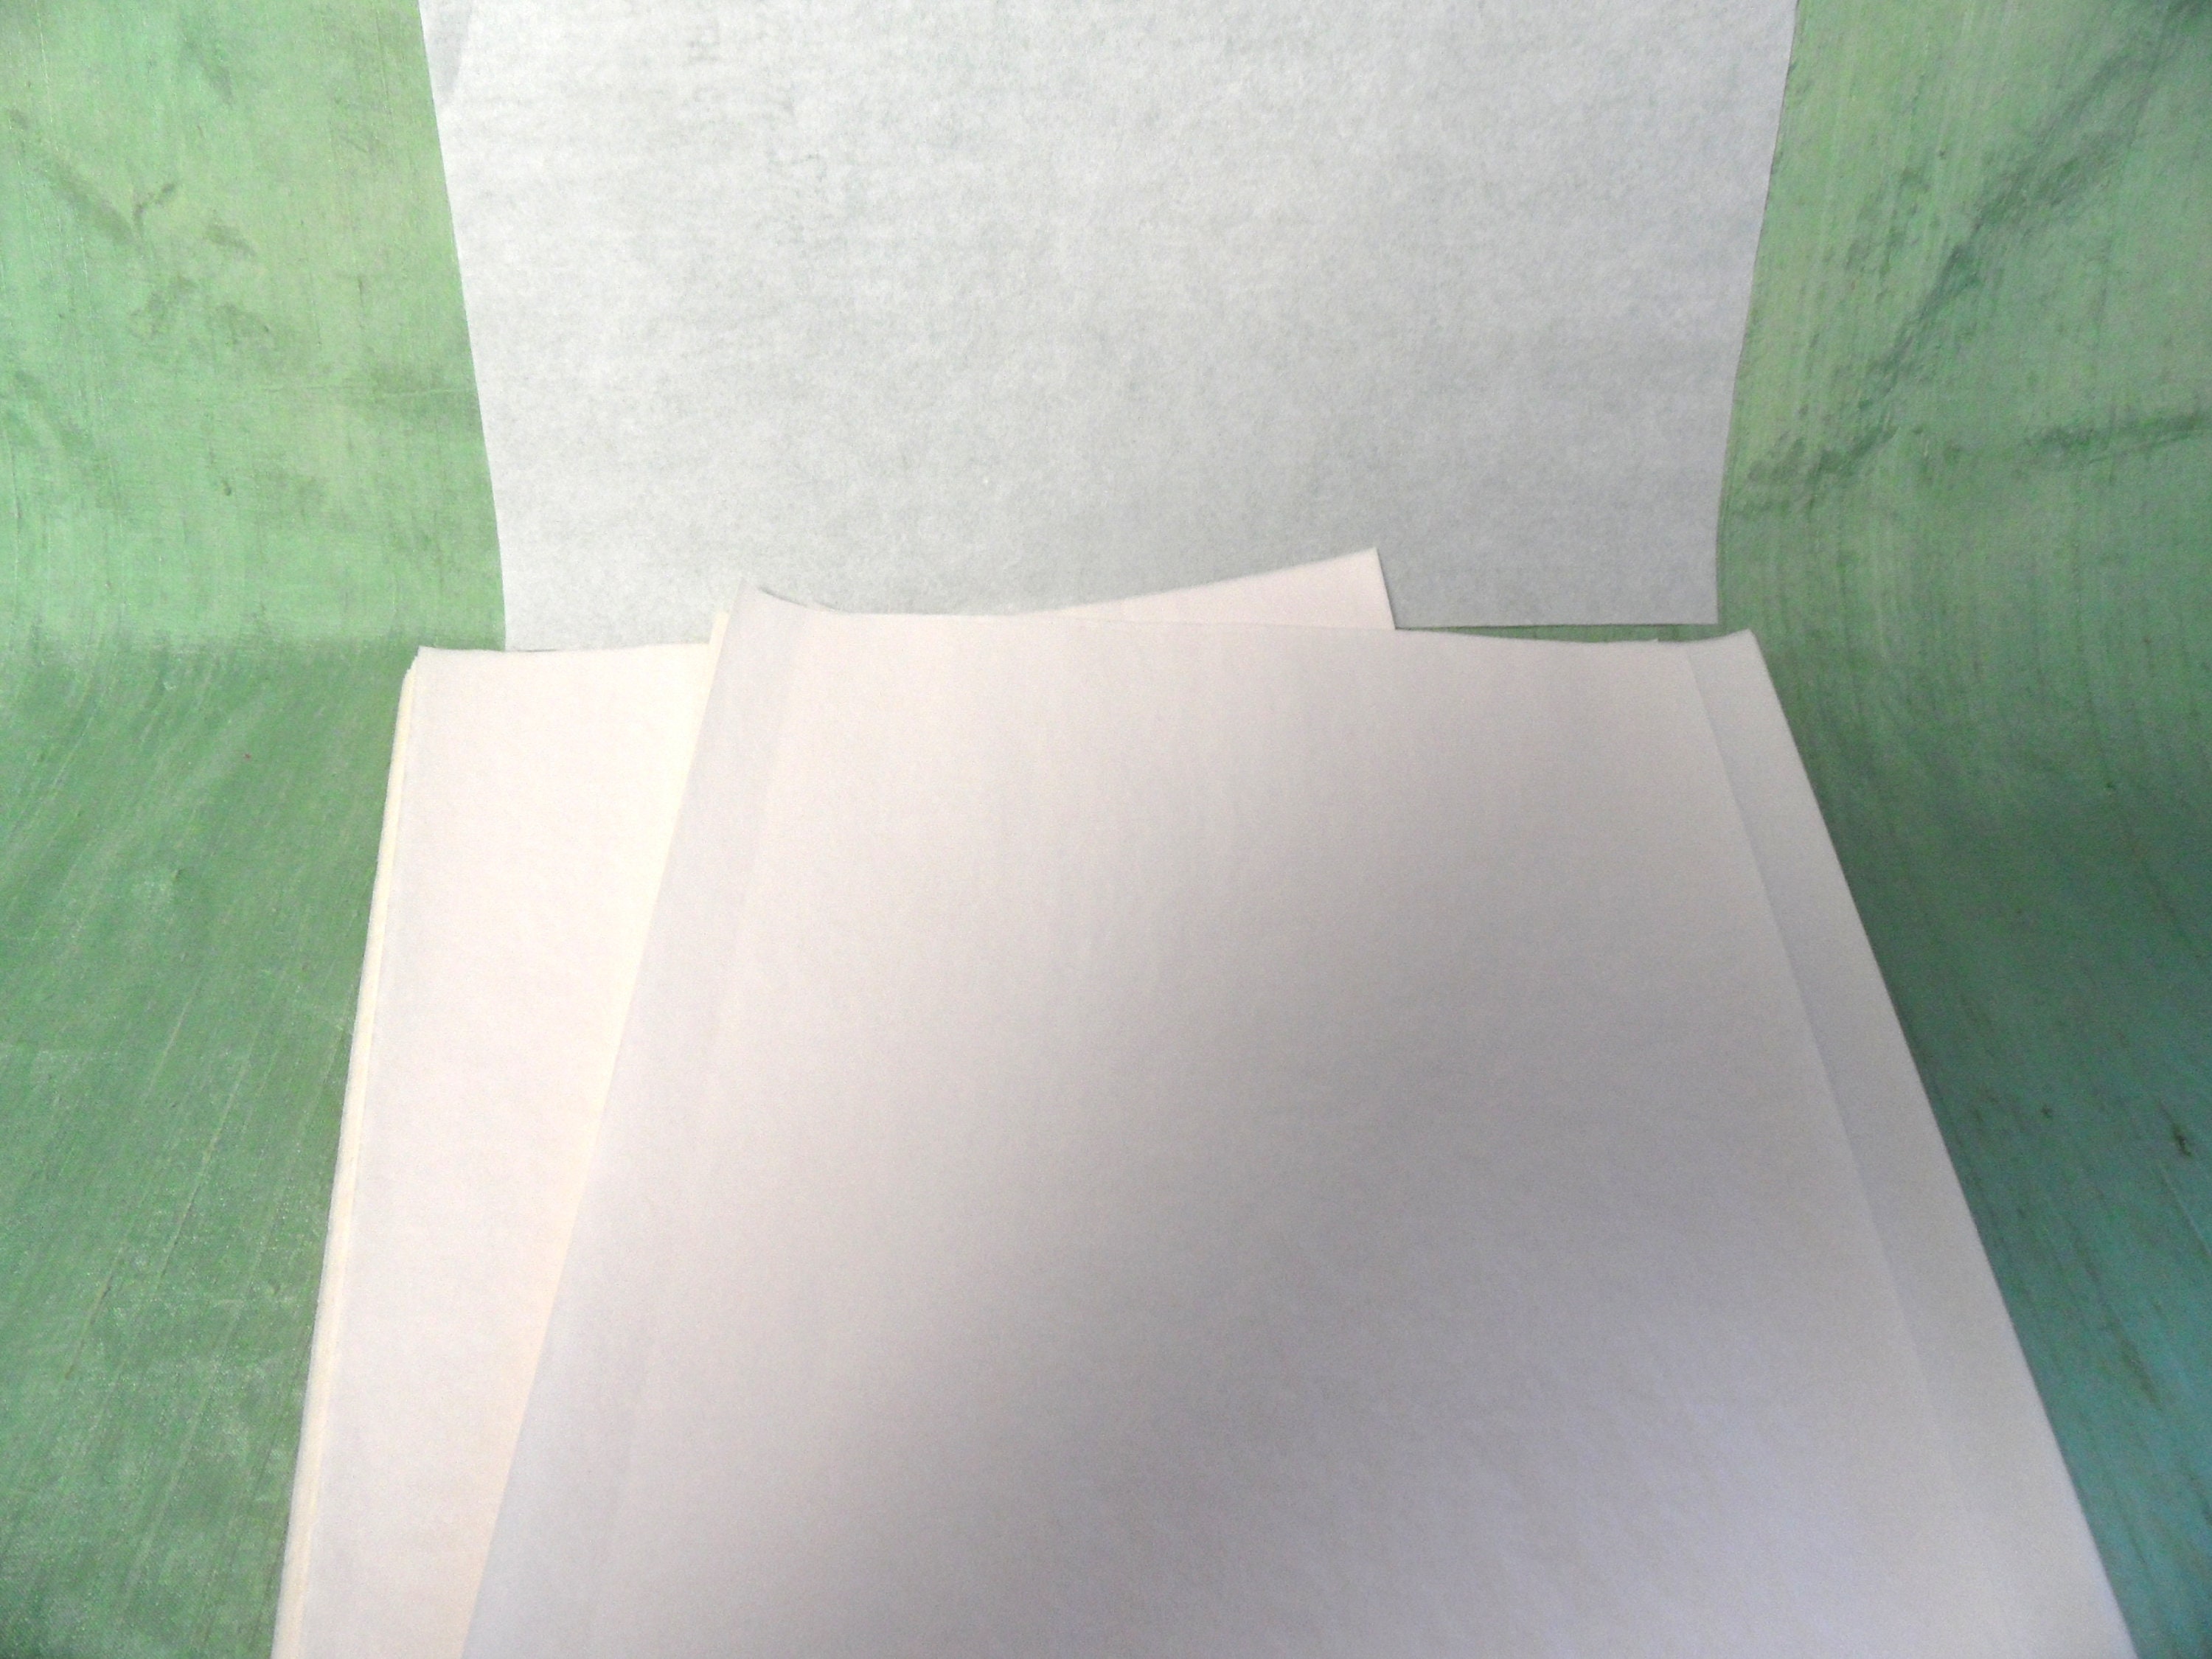 Vintage Keebord Plover Onion Skin 8.5 x 11 Typing Paper *82 Sheets